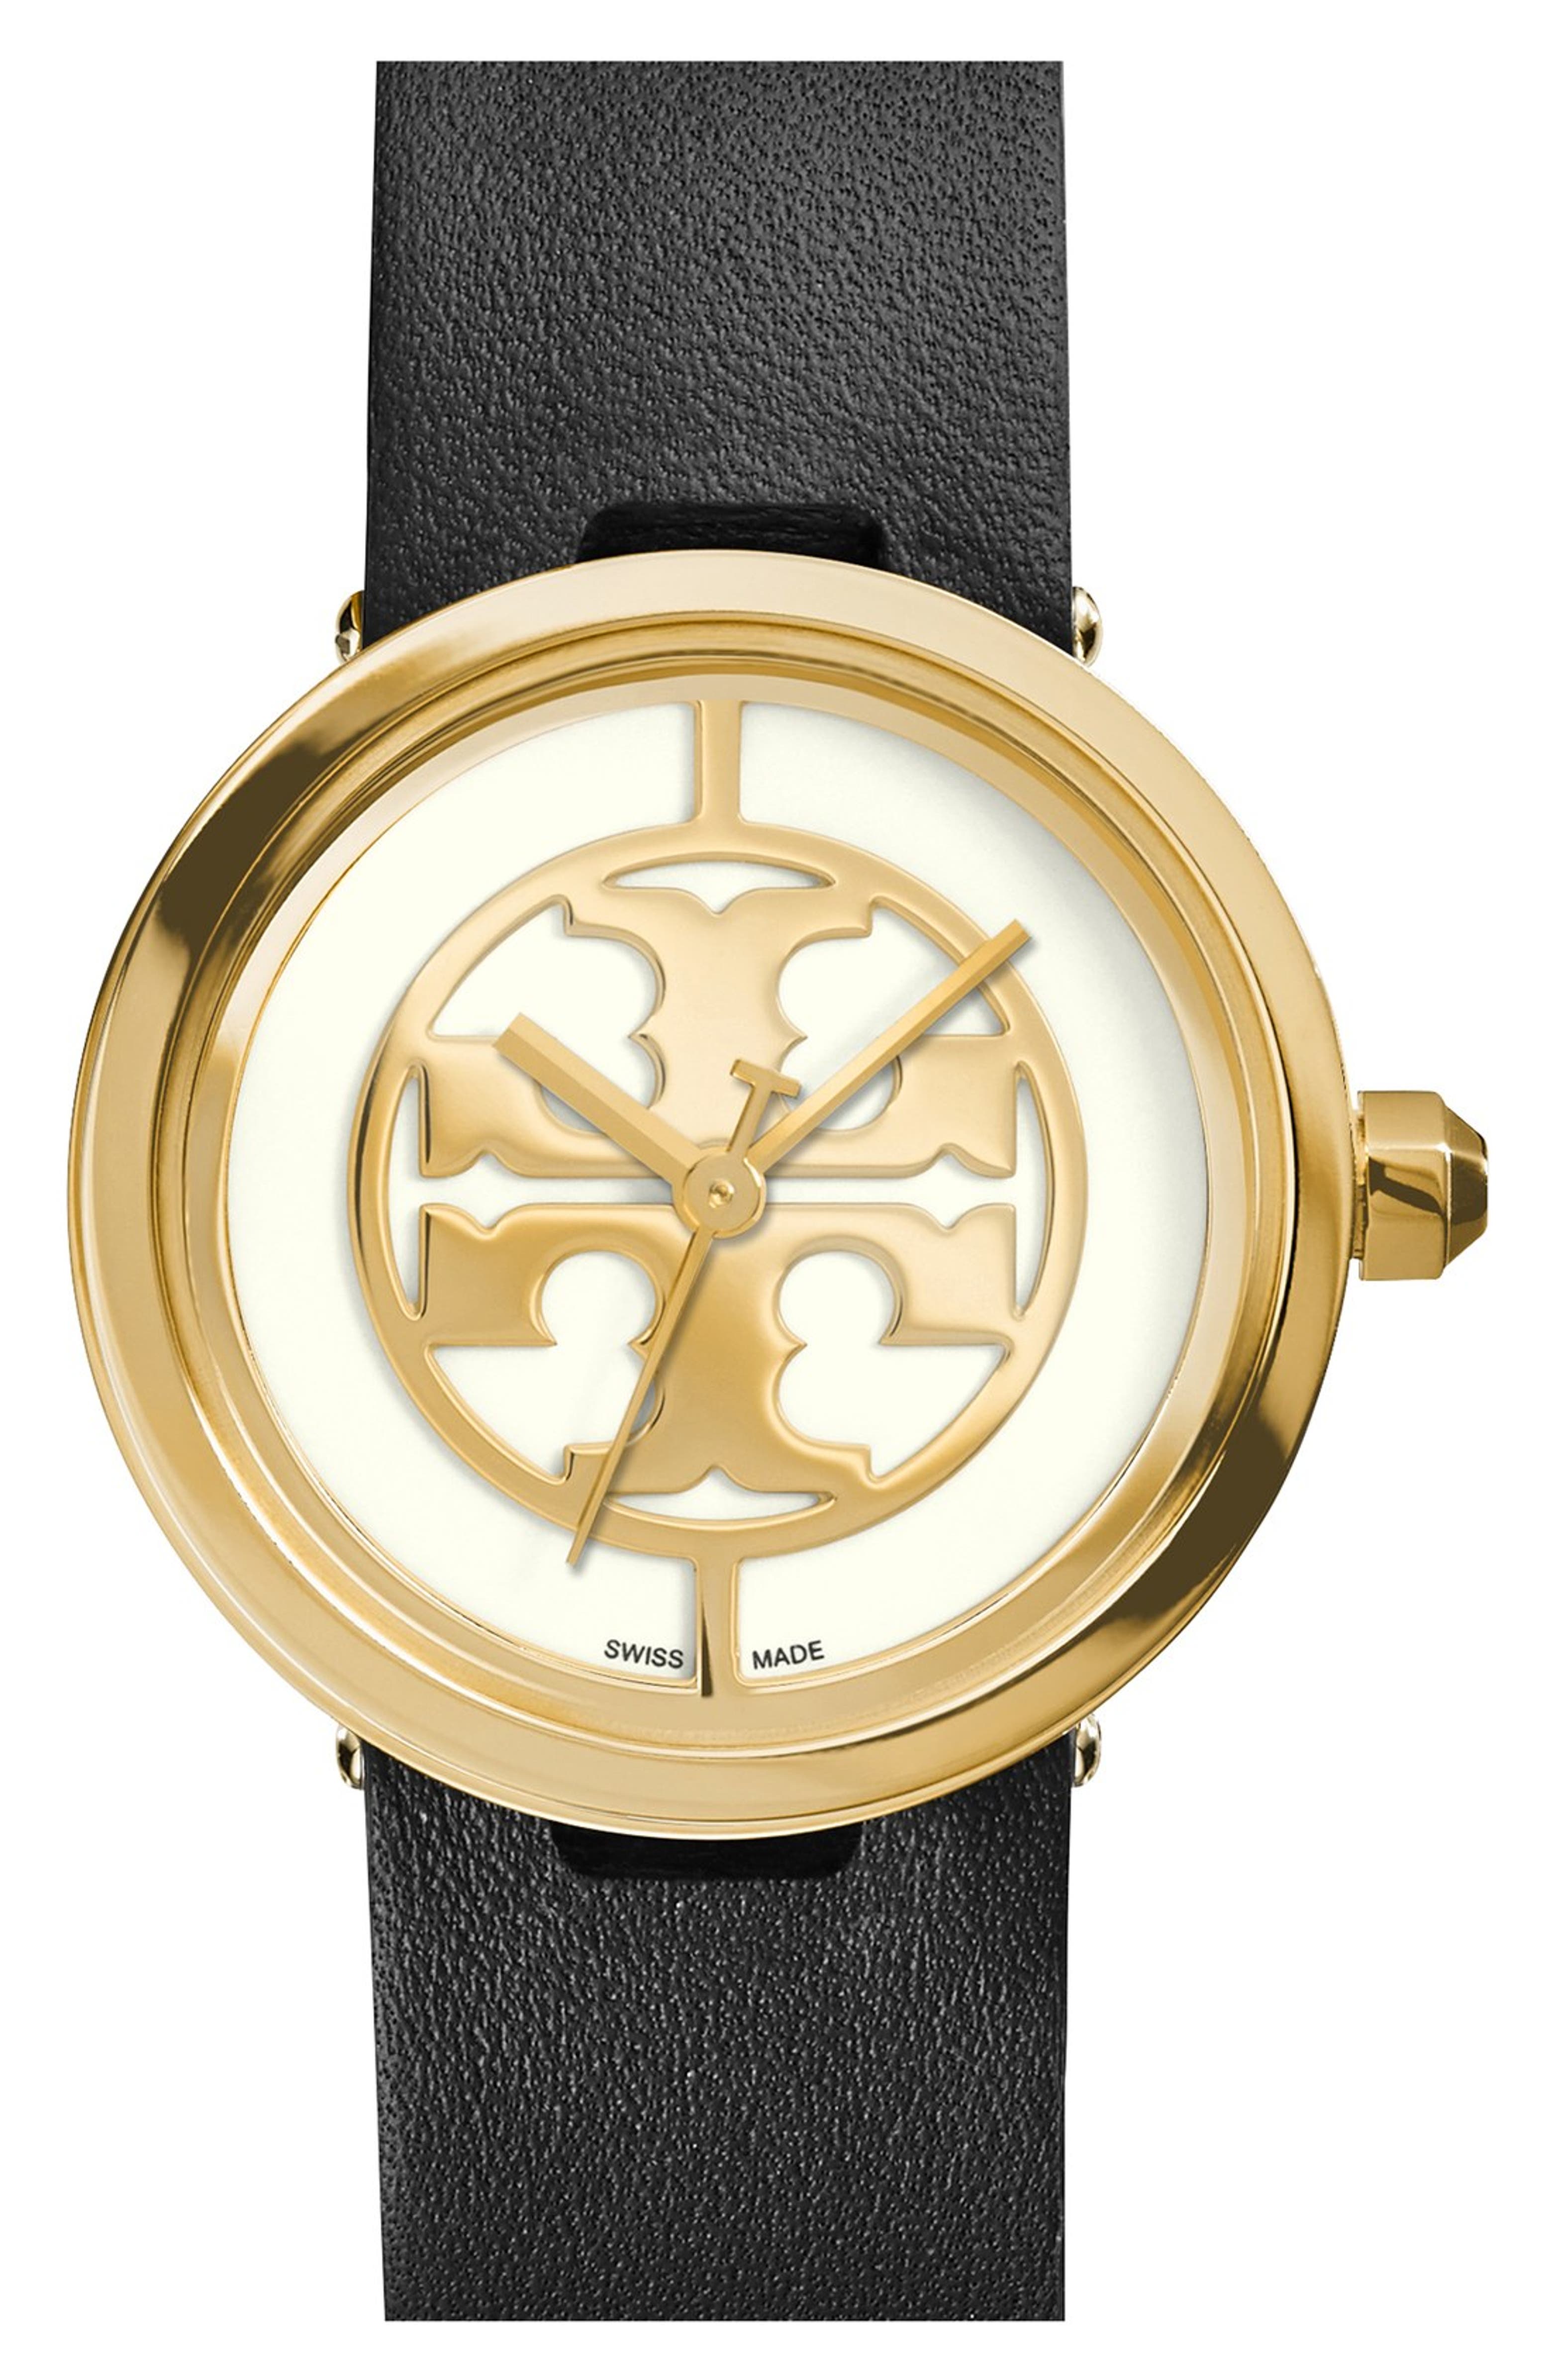 Tory Burch 'Reva' Logo Dial Leather Strap Watch, 28mm | Nordstrom